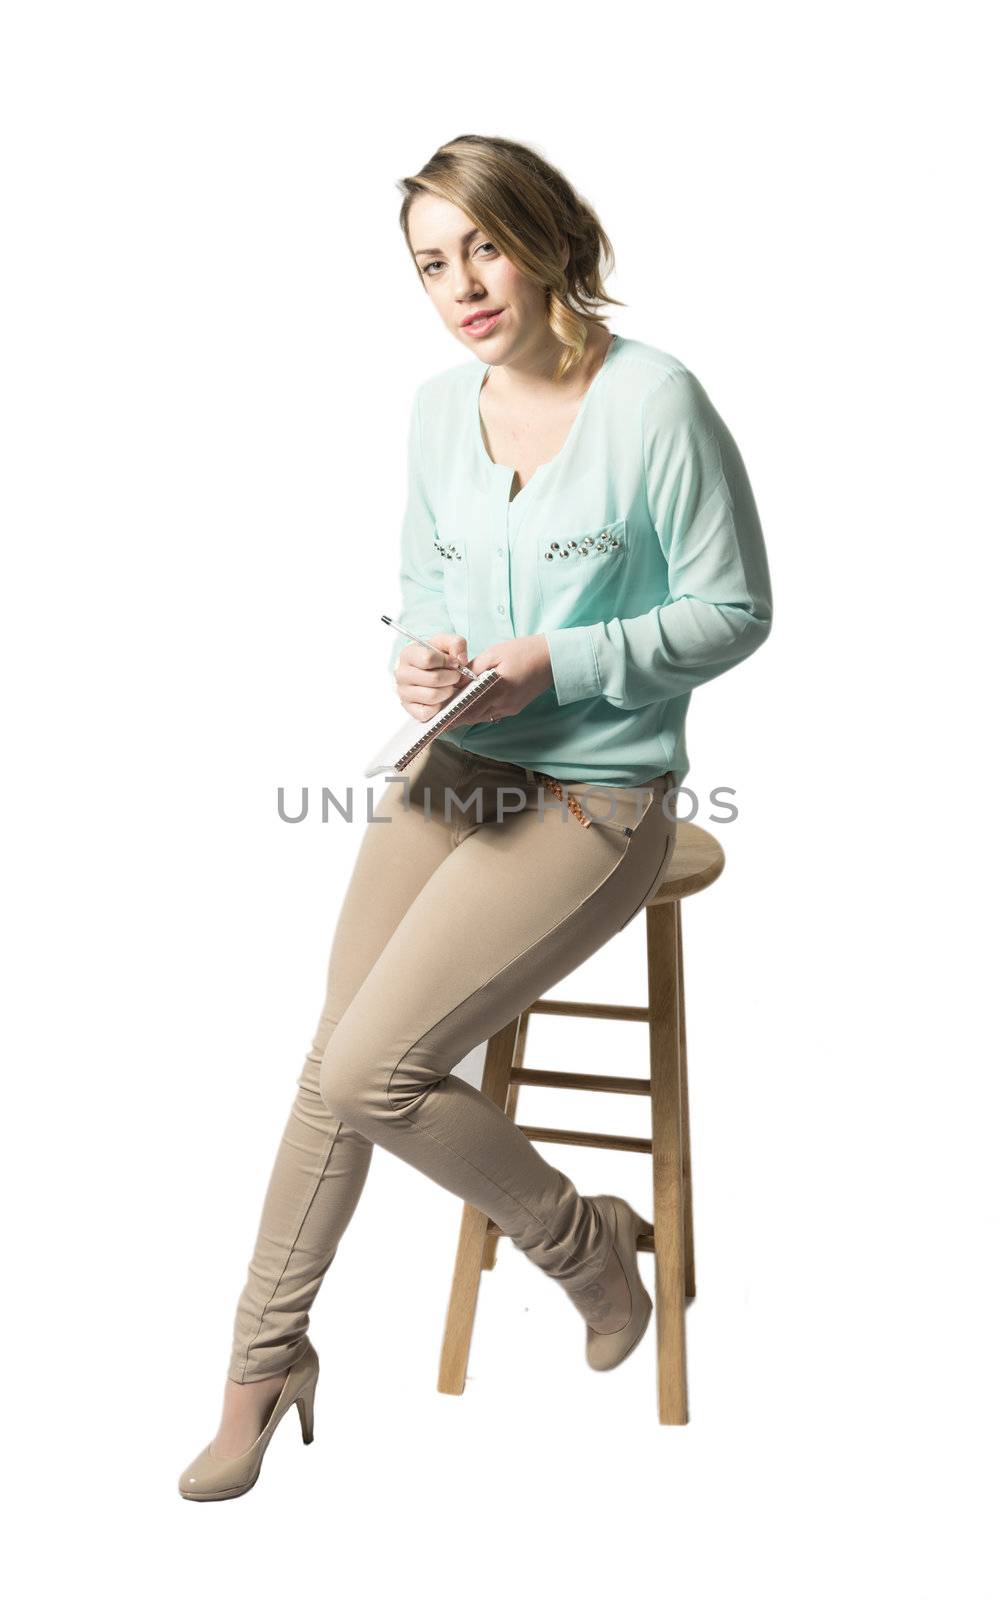 Business woman taking notes sitting on stool. Isolated on white background